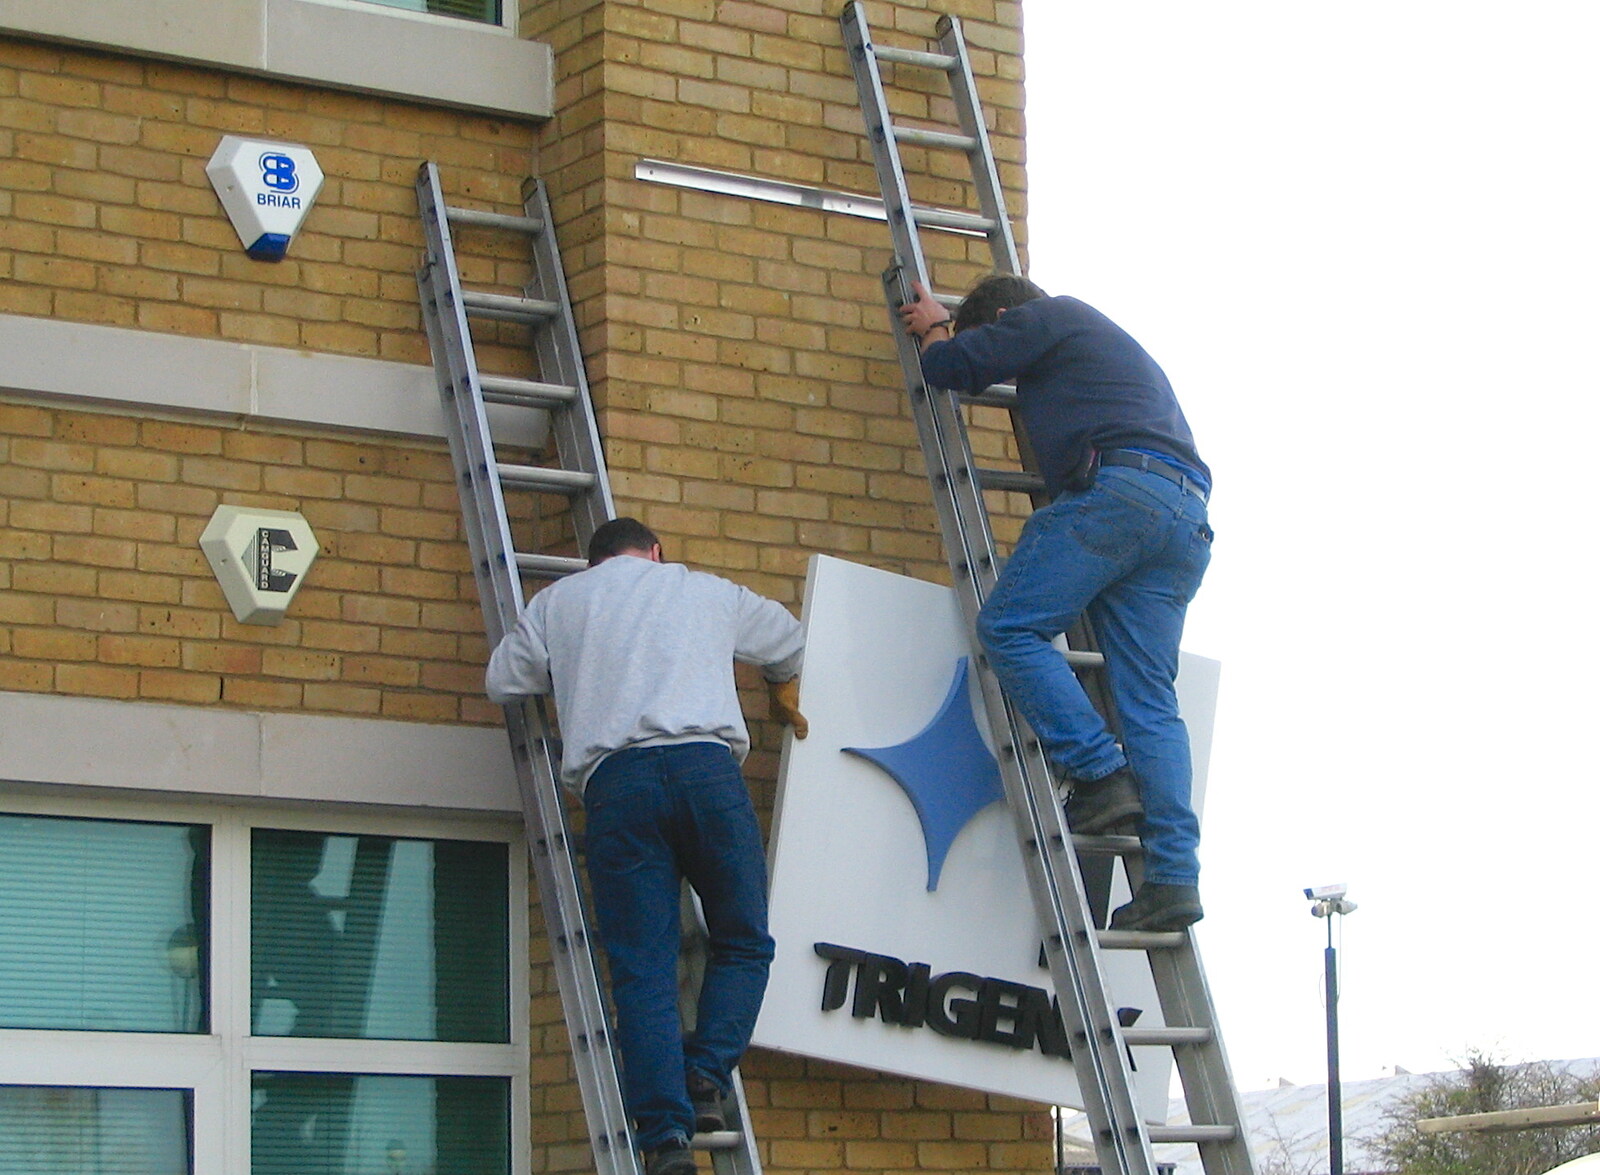 The sign is removed from A Swan Car Crash and the End of Trigenix, Brome and Cambridge - 31st January 2005